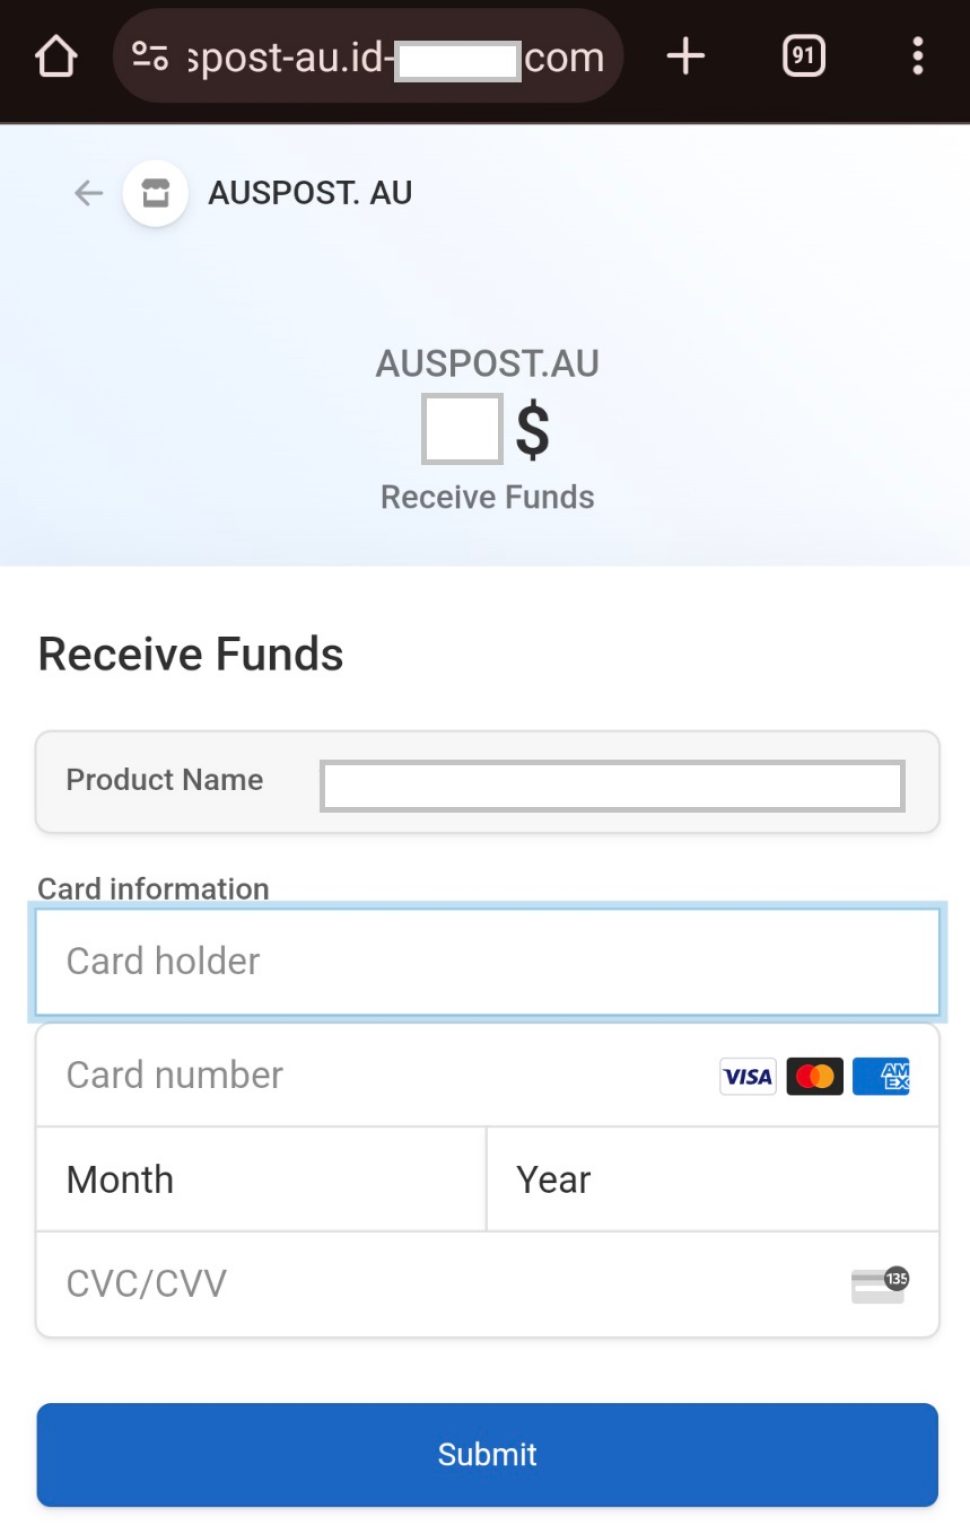 Screenshot of a payment interface on the AUSPOST AU website, with fields for entering product name and card details including card holder’s name, card number, expiration date, and CVC/CVV code, along with Visa and Mastercard logos, and a ‘Submit’ button for completing the transaction.